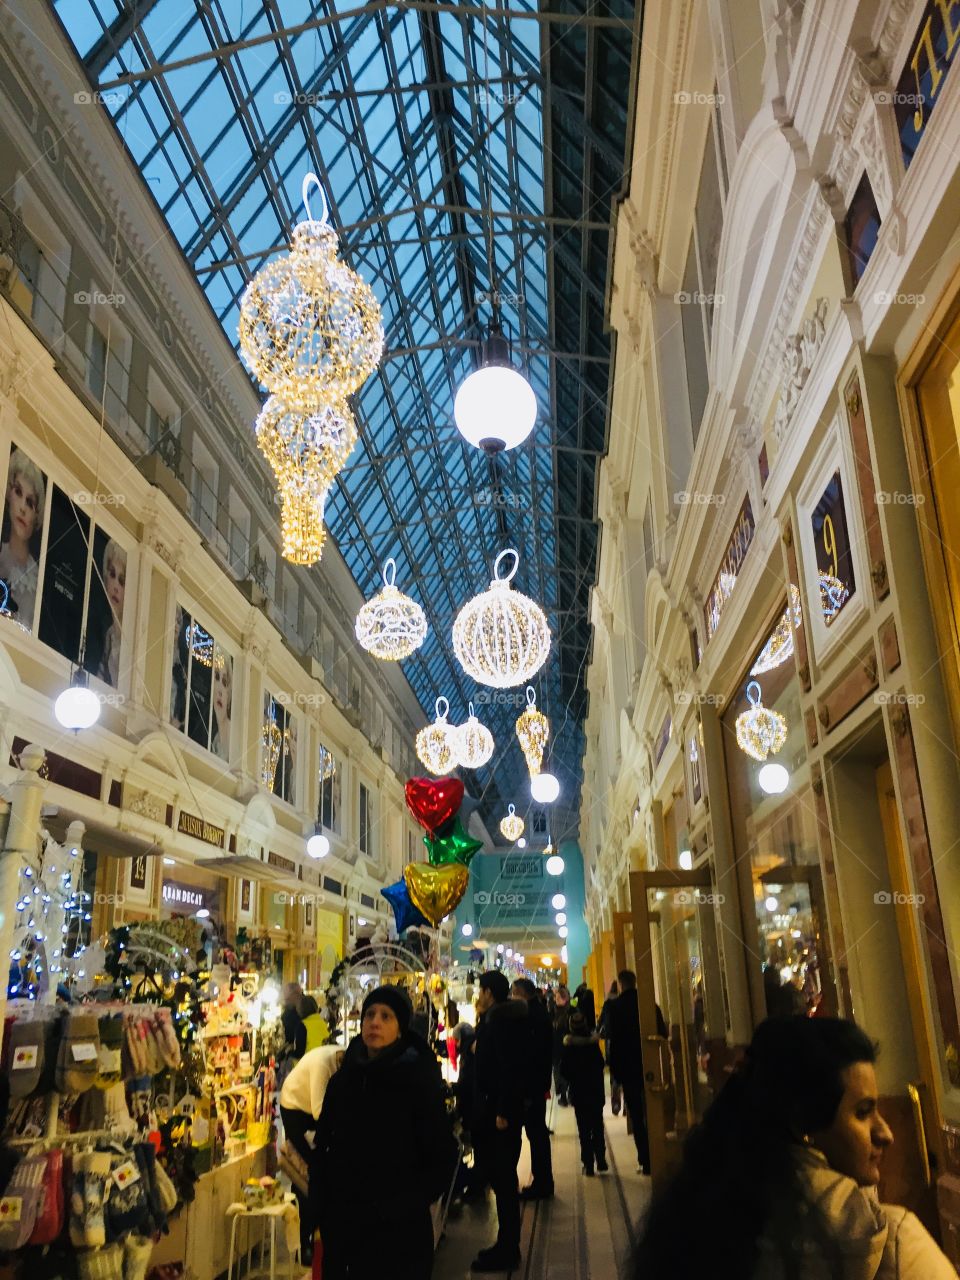 Christmas decorations in a shopping complex in Saint Petersburg ♥️